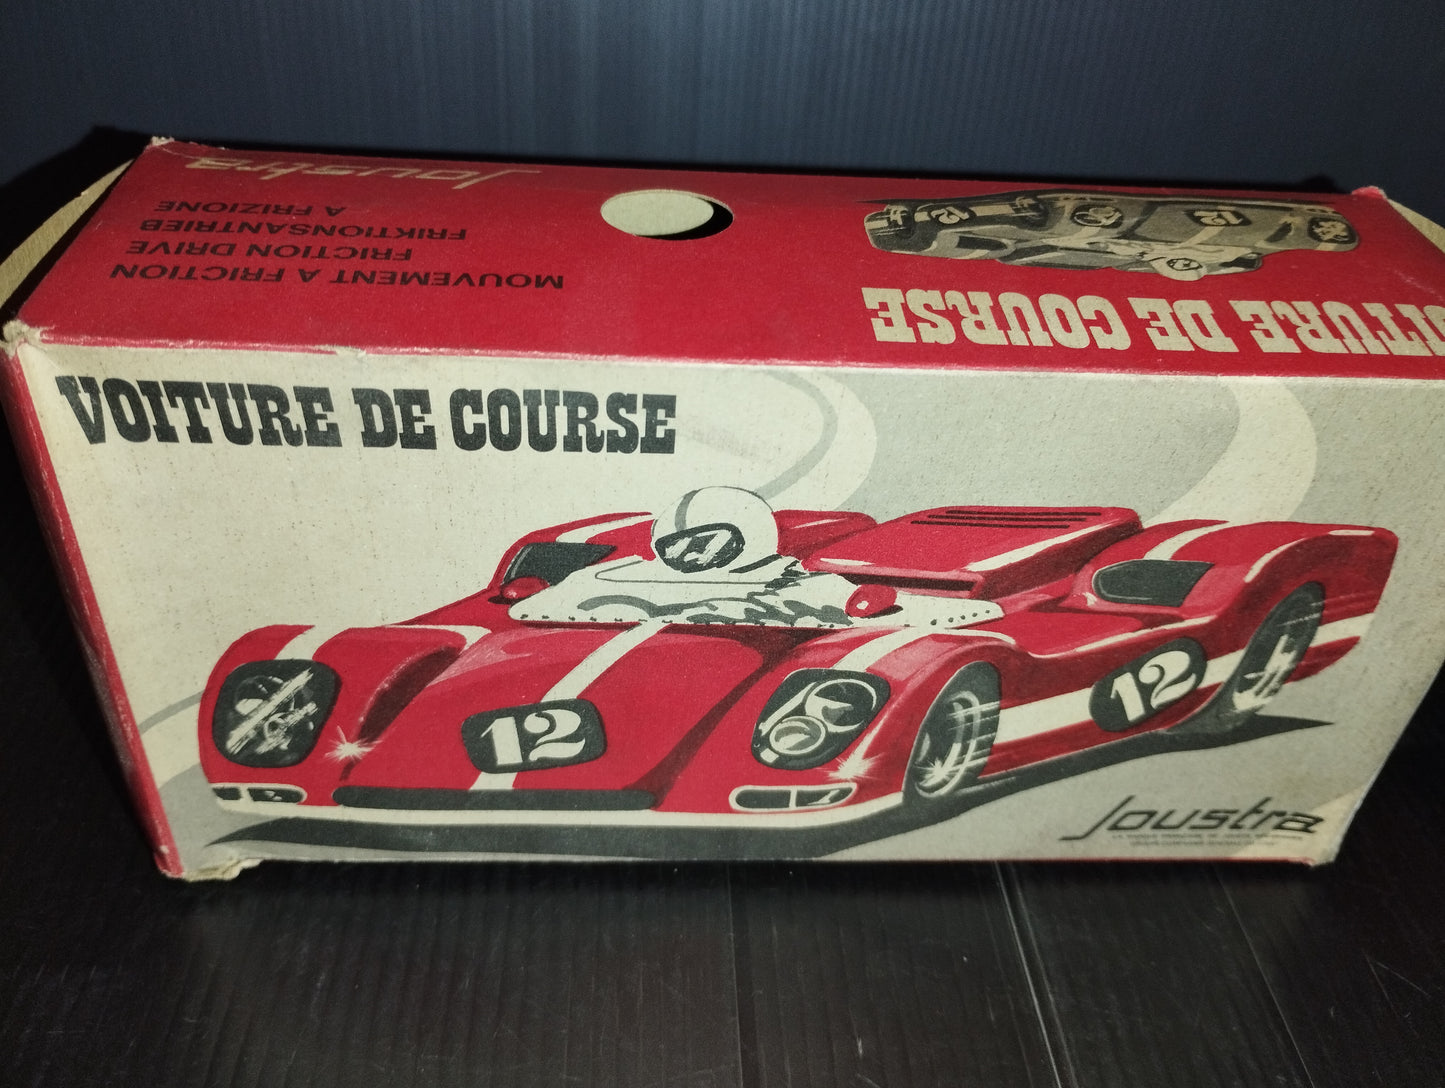 Voiture De Course Joustra model from the 60s/70s

 Made in France